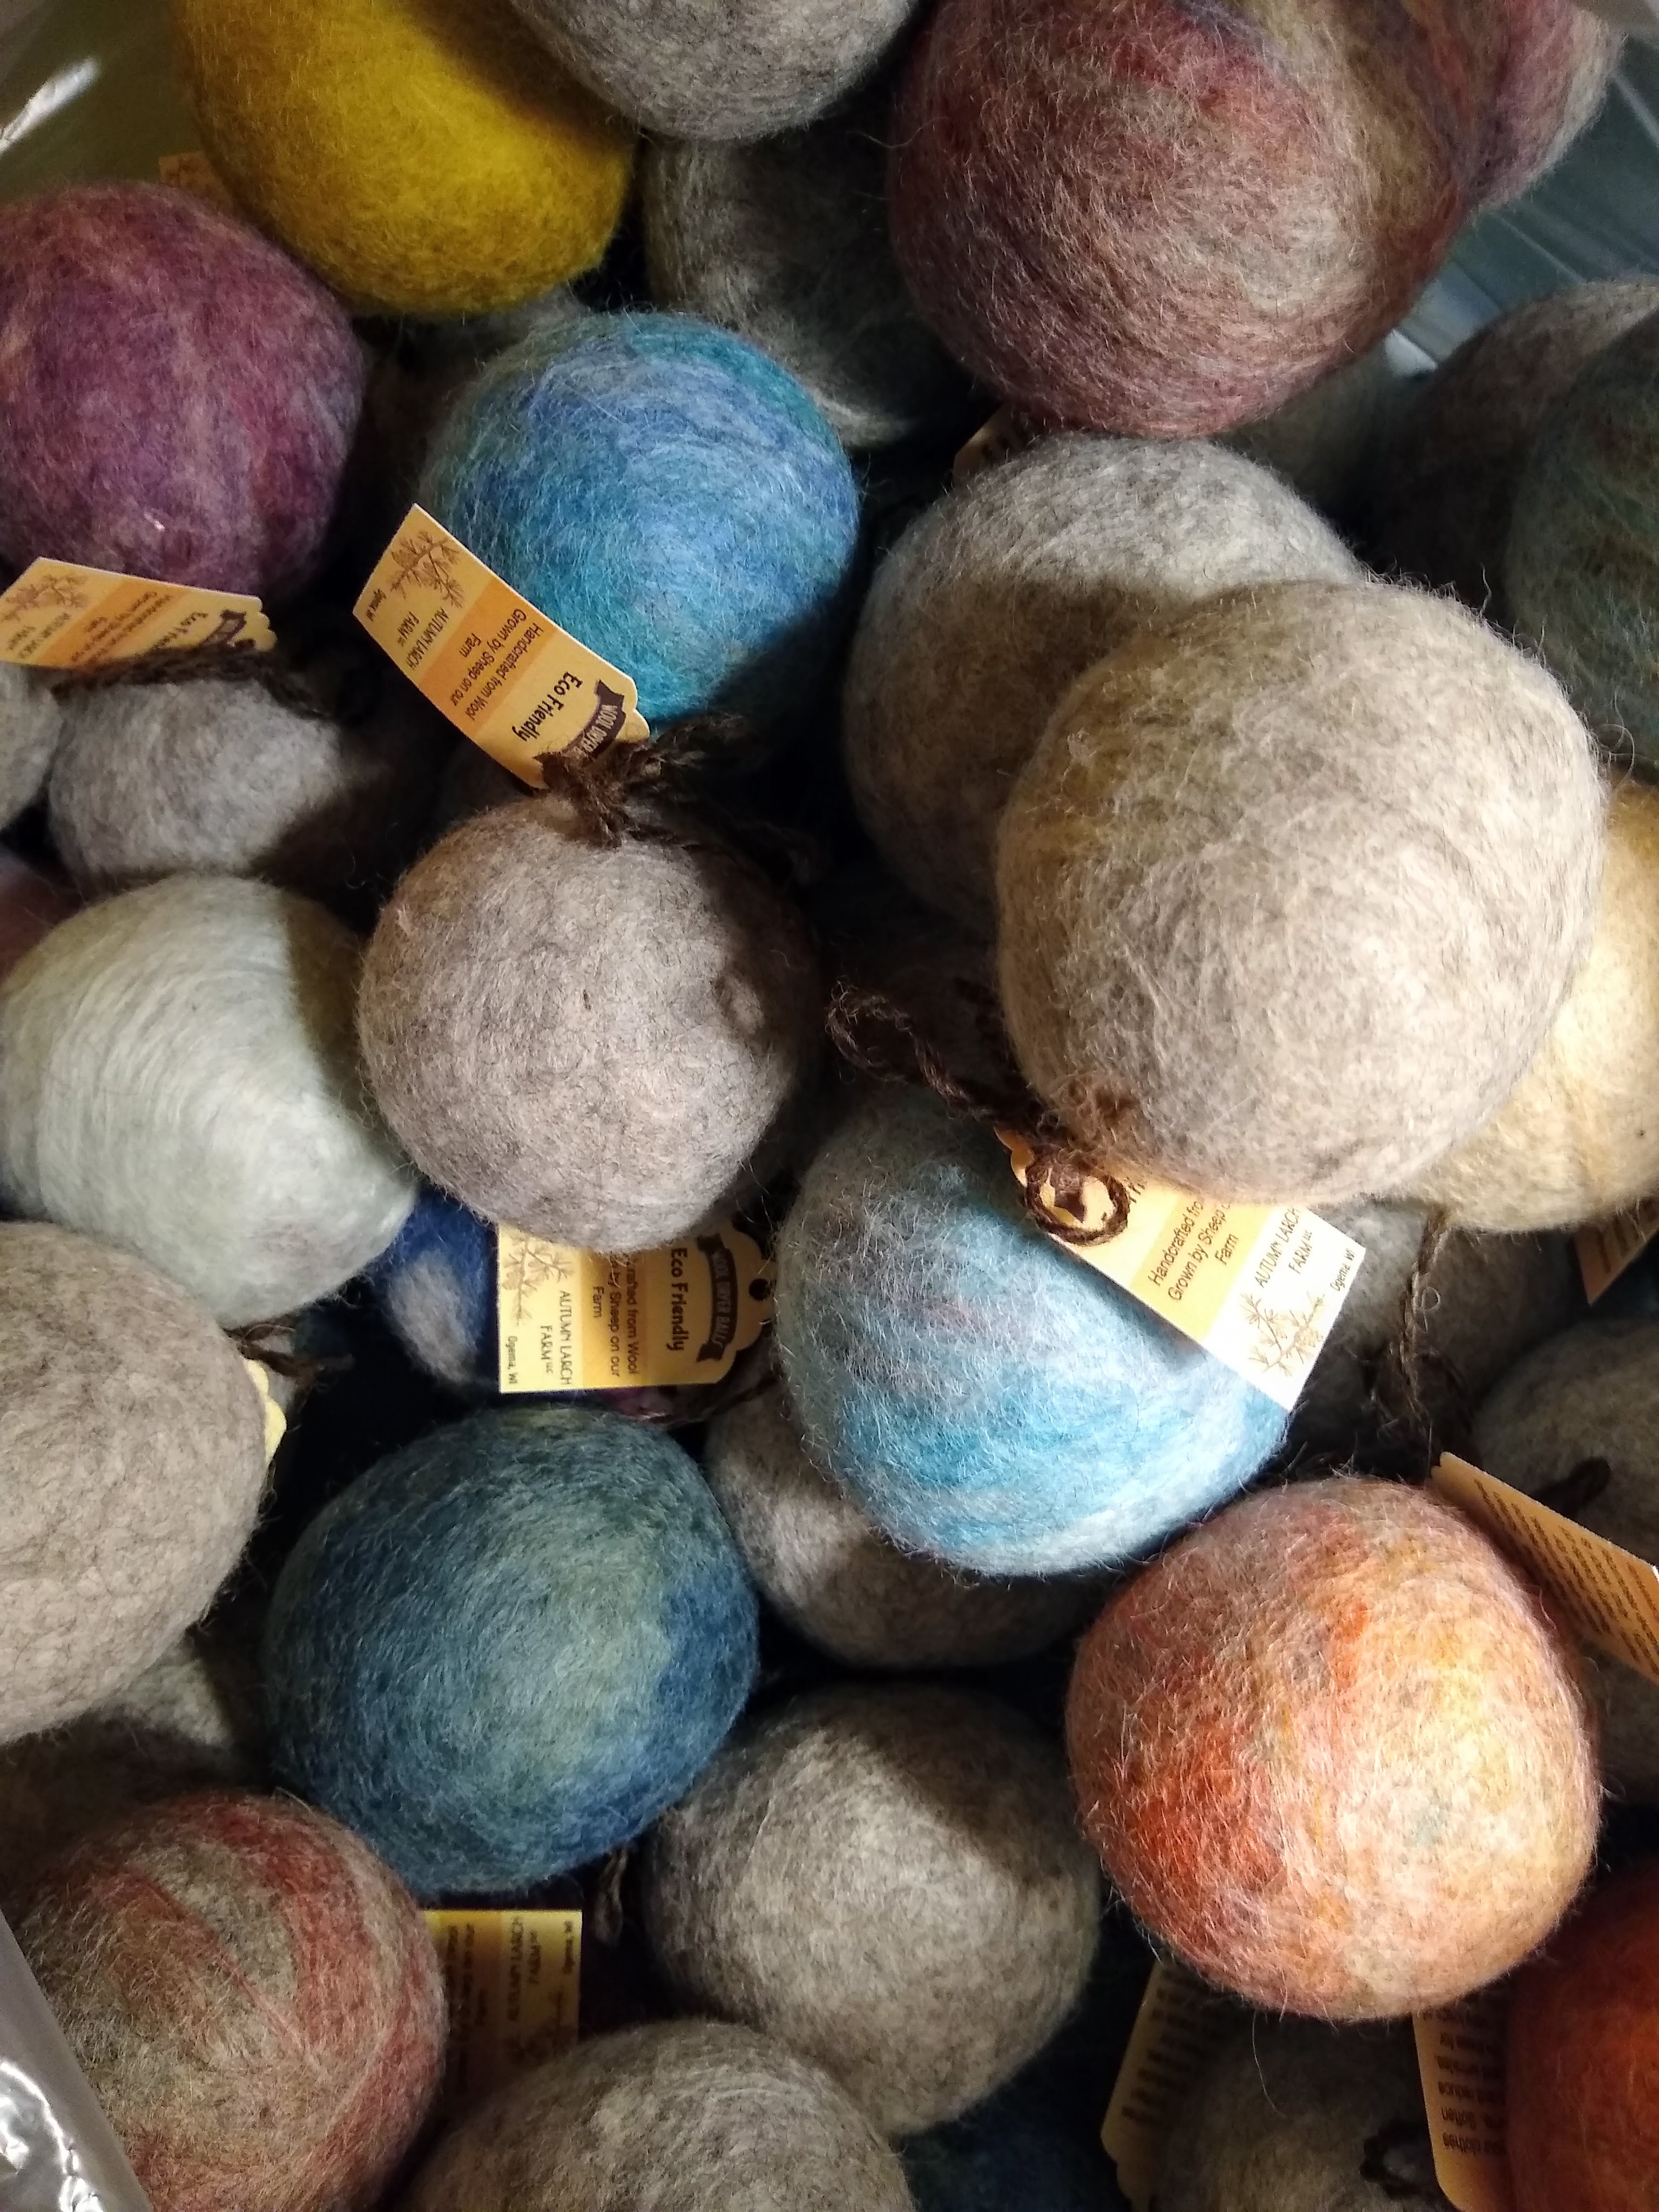 Many wool dryer balls of varying colors all mounded together.